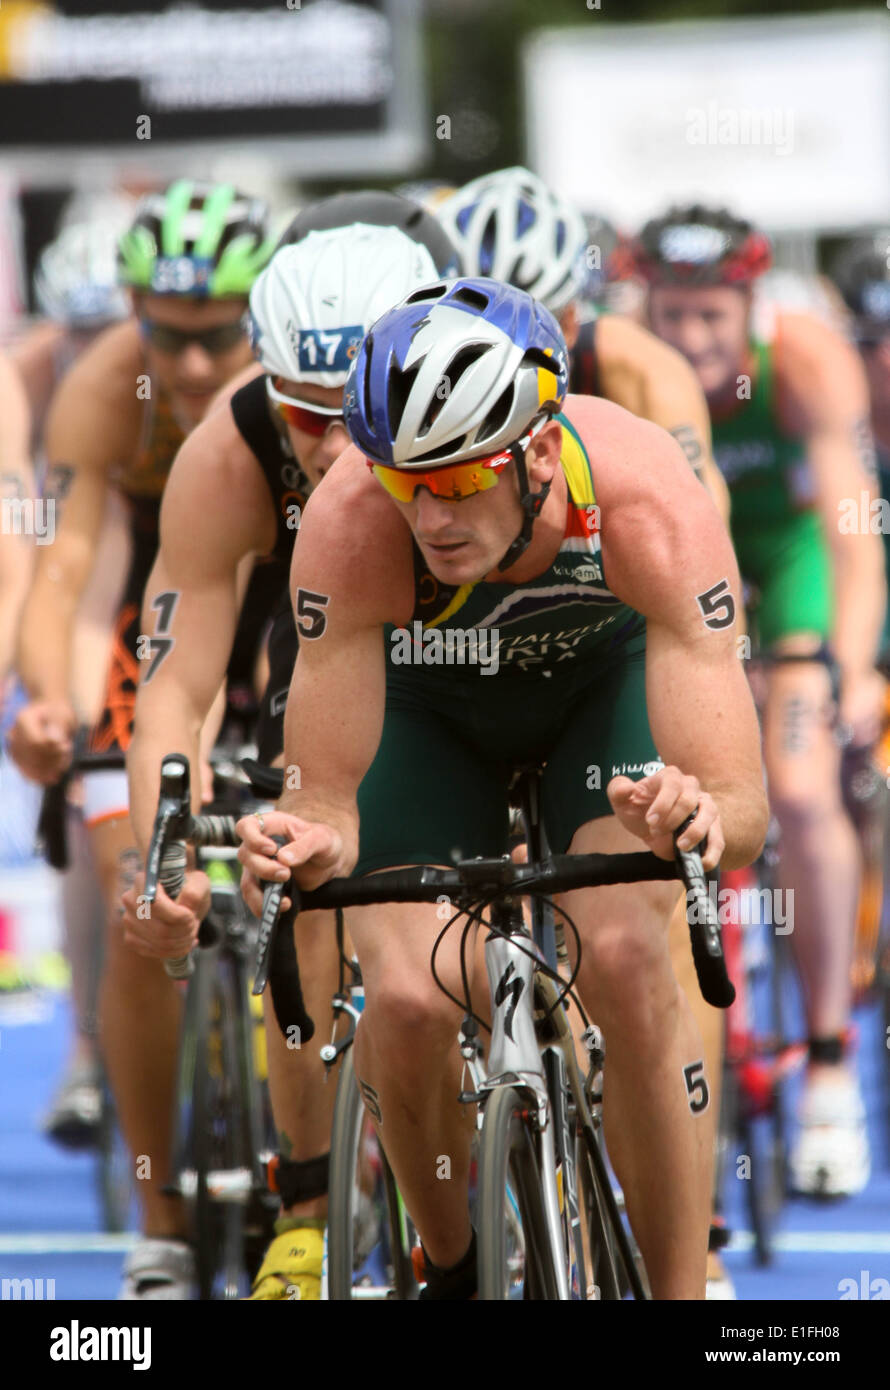 Murray at the bike stage during the 2014 ITU Triathlon held in London Stock Photo